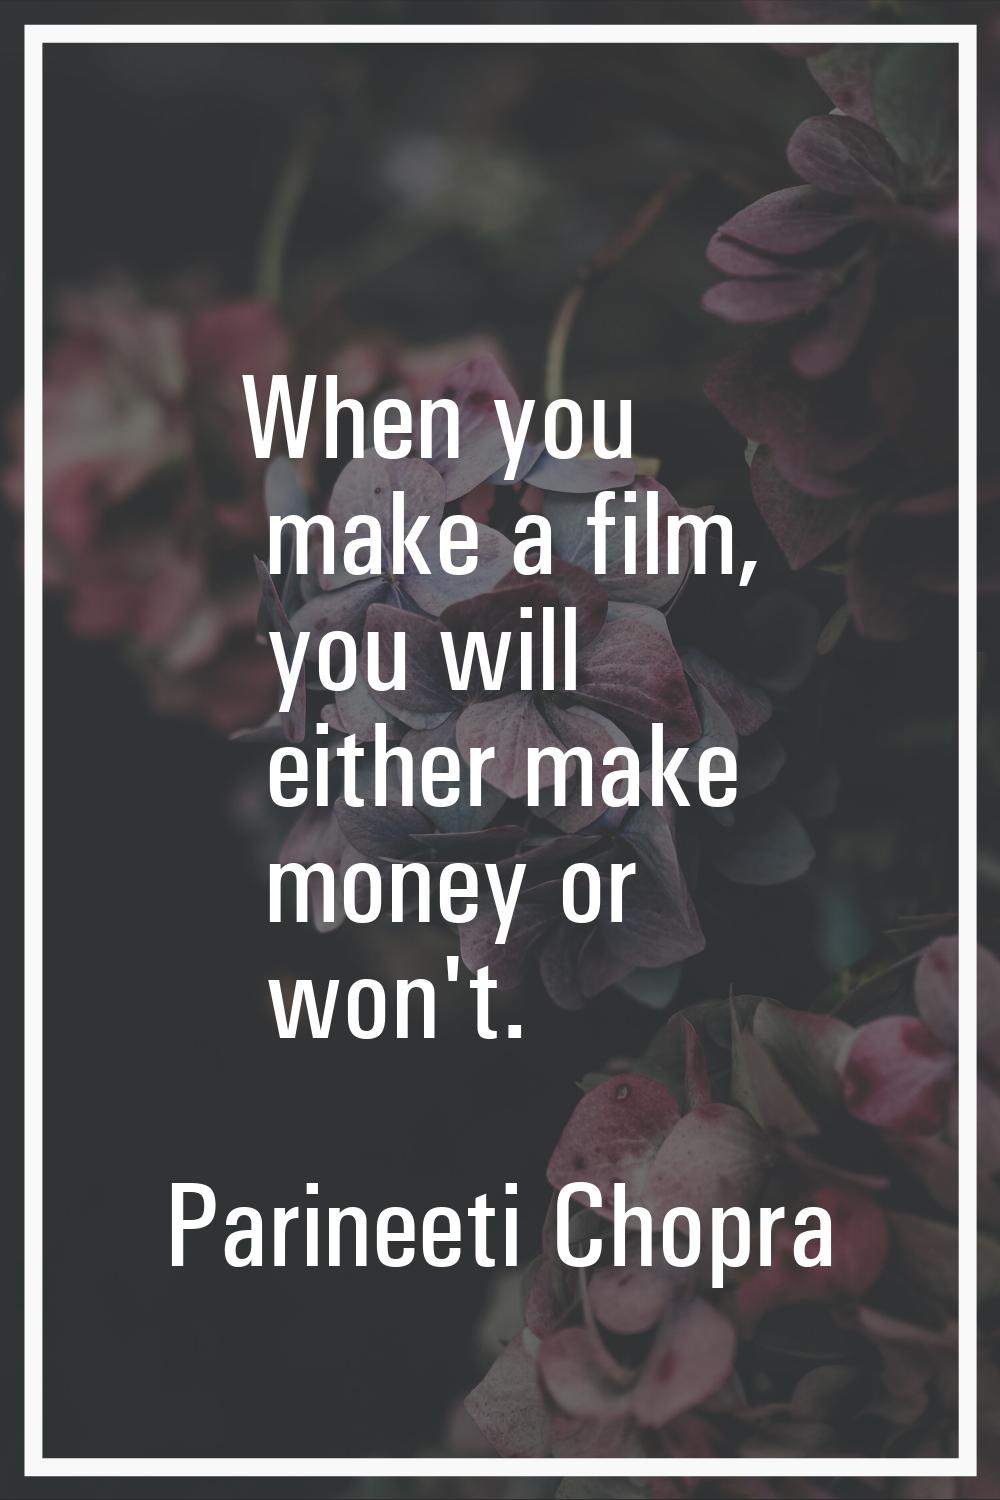 When you make a film, you will either make money or won't.